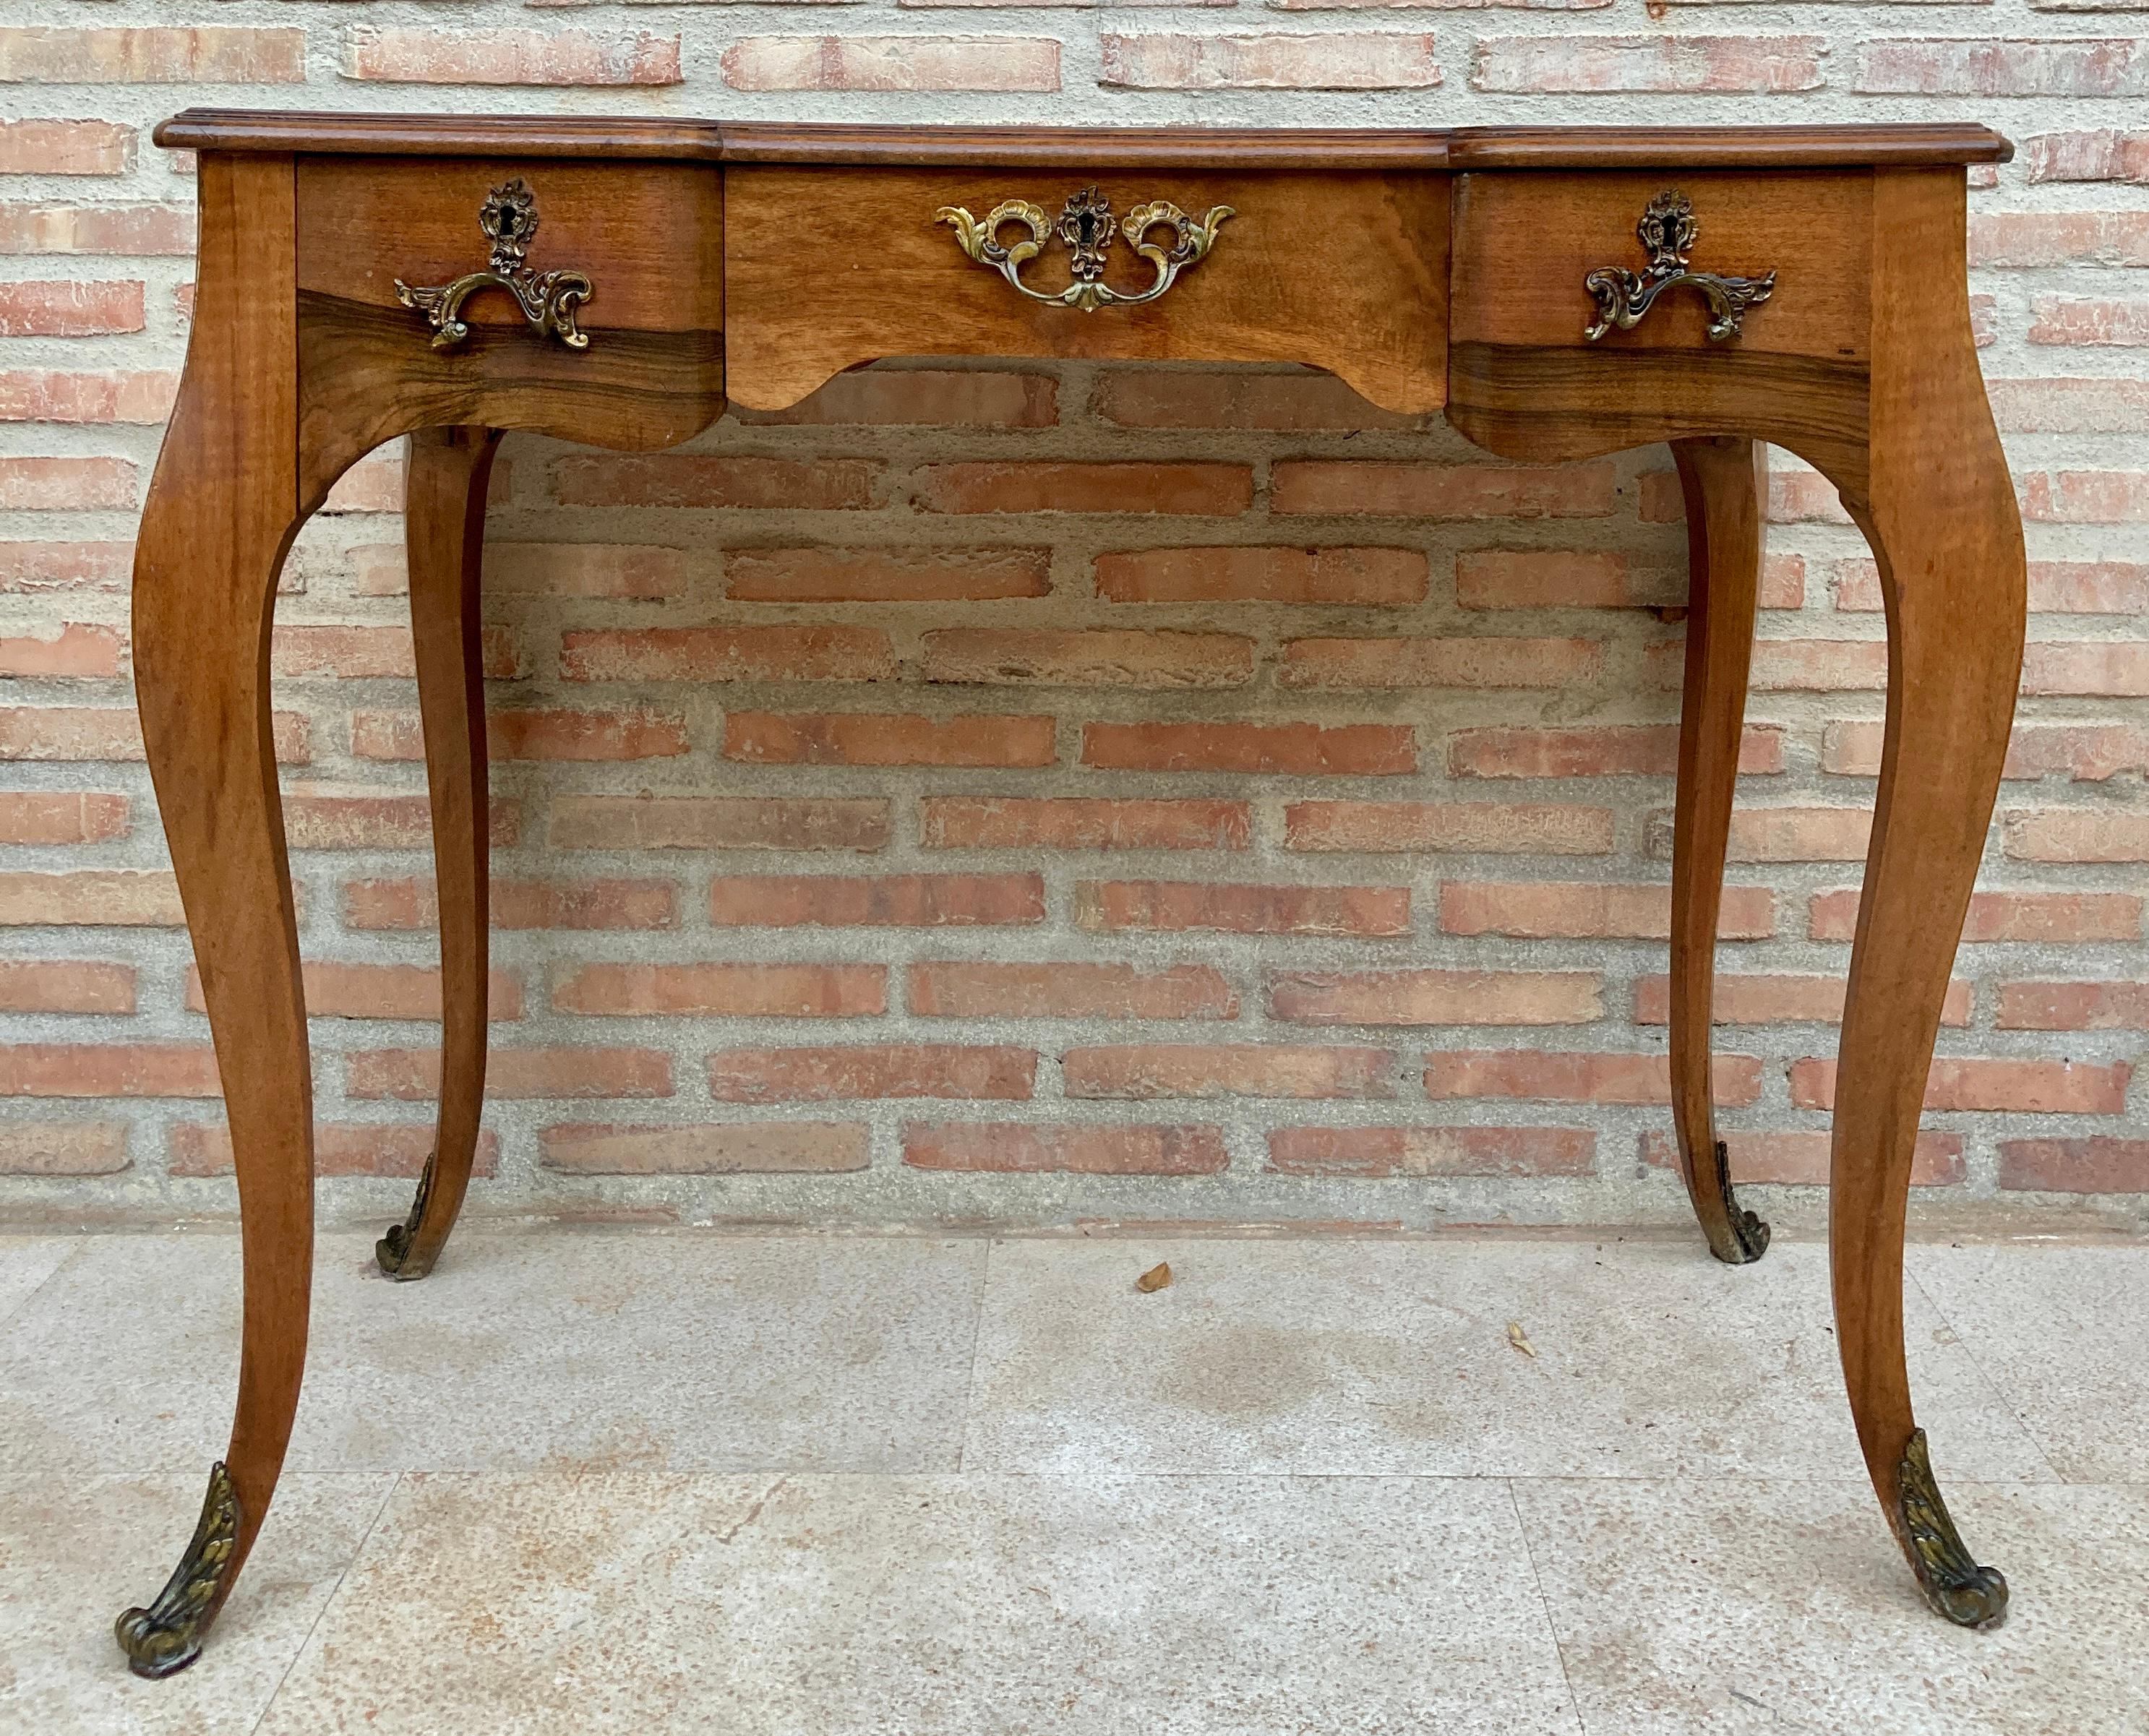 19th century Louis XV style French walnut writing desk with three drawers and cabriolet legs. Created in France during the 19th century, this walnut desk features a rectangular plank top above three drawers fitted with bronze pulls. Raised on four